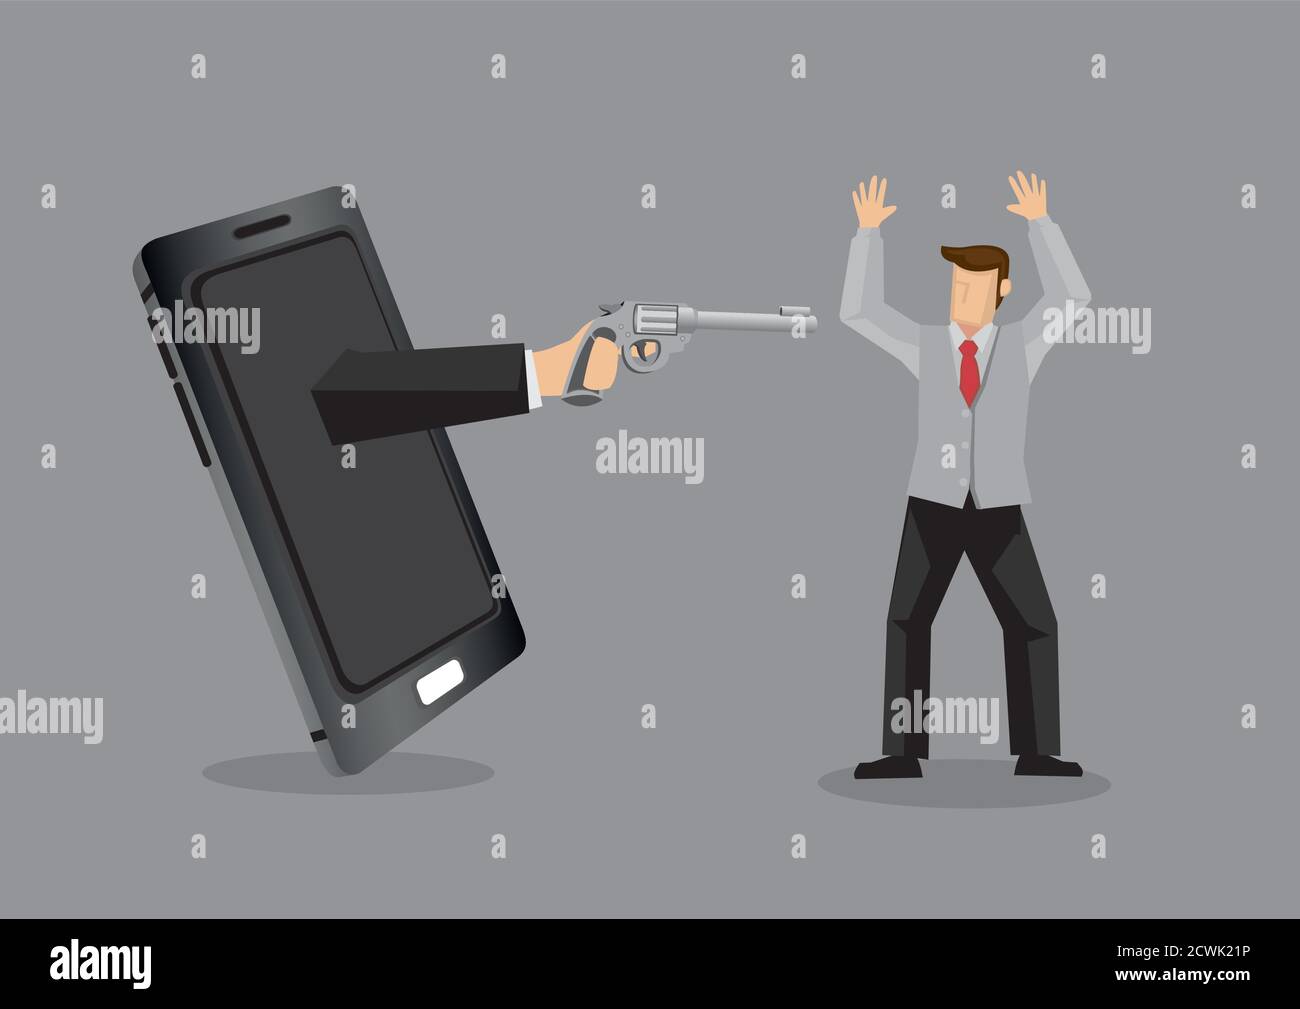 Hand from mobile phone holding gun and threatening cartoon man in hands-up surrender gesture, metaphor for threats of modern technology. Creative vect Stock Vector